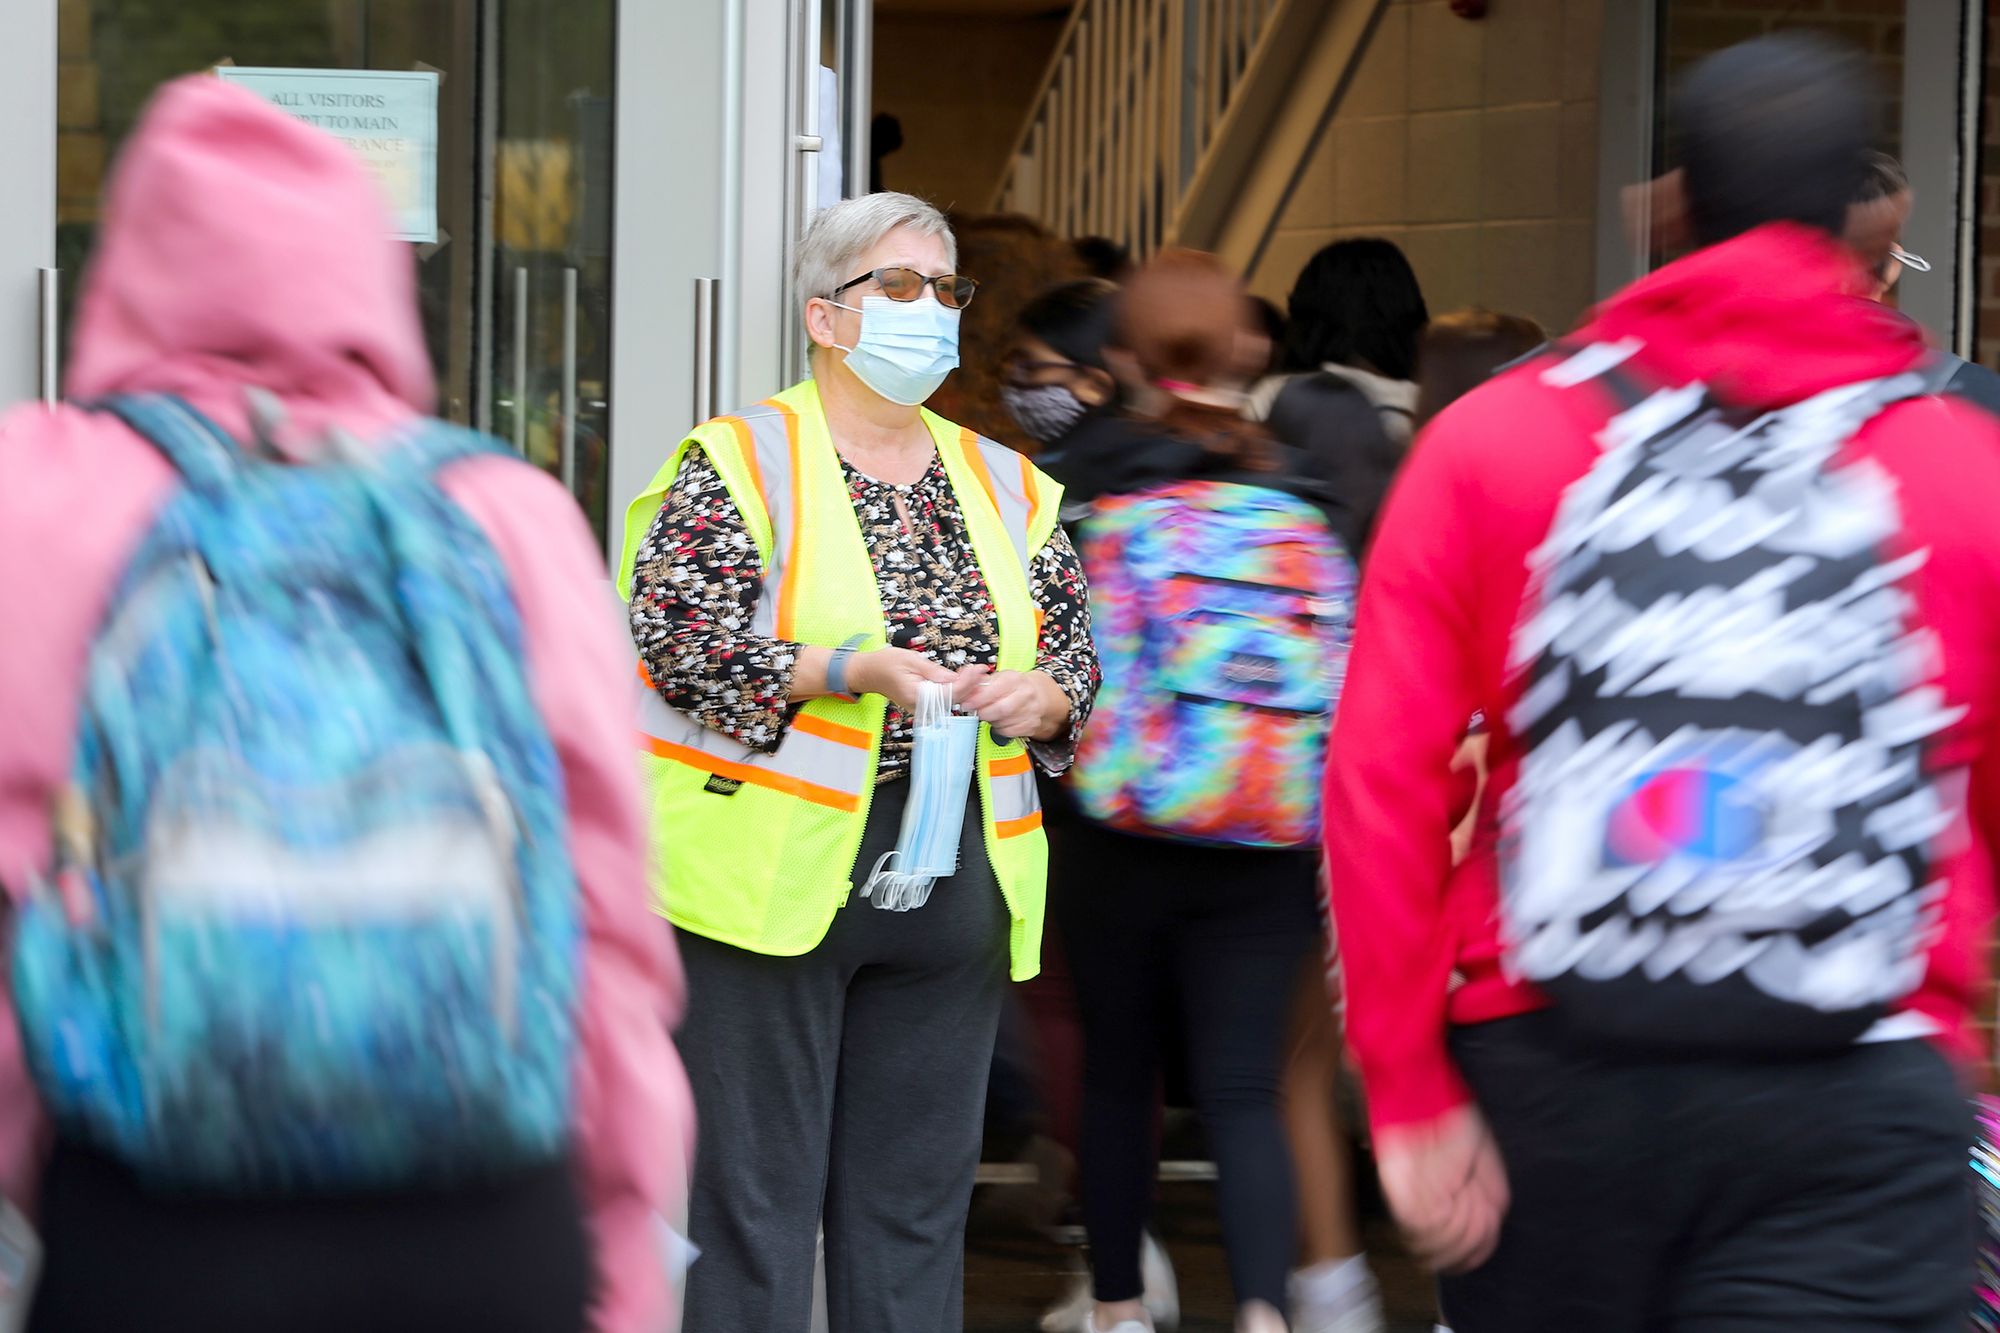 PHOTO: Dr. Diane Niles, assistant principal, makes sure all students are wearing masks as they arrive for the day and has masks available for any student who needs one in Middletown, Conn., Oct. 6, 2021.